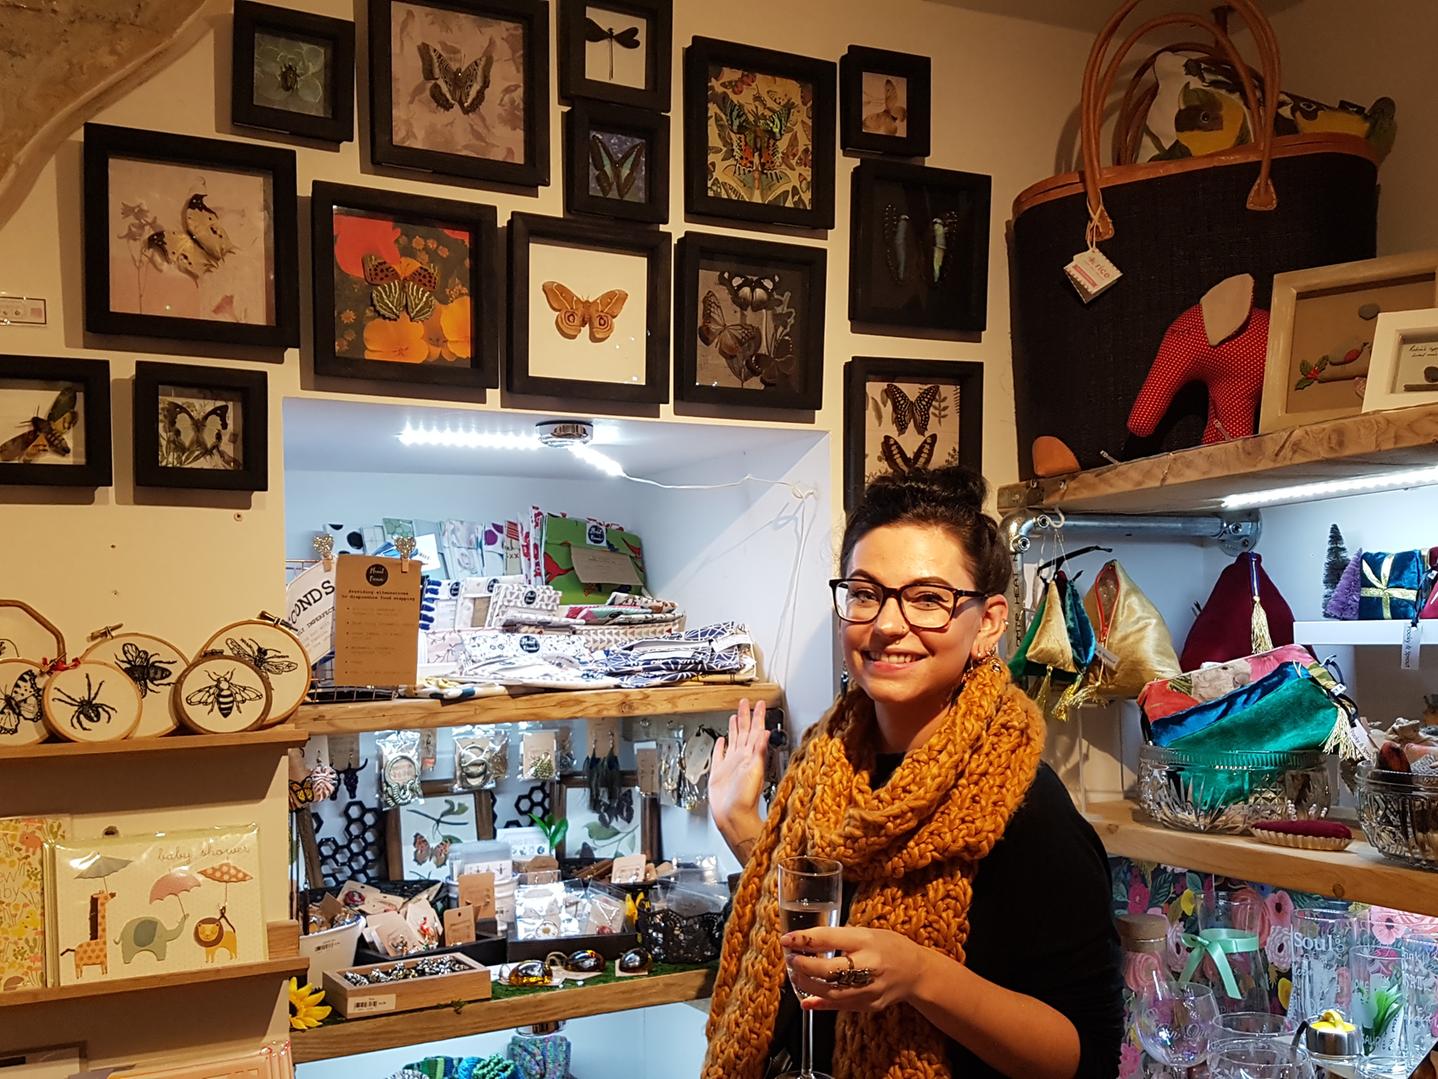 Susan Askew is a trader at The Bean Hive who runs Stoned Affection. She breeds some moths that feature in her frames.